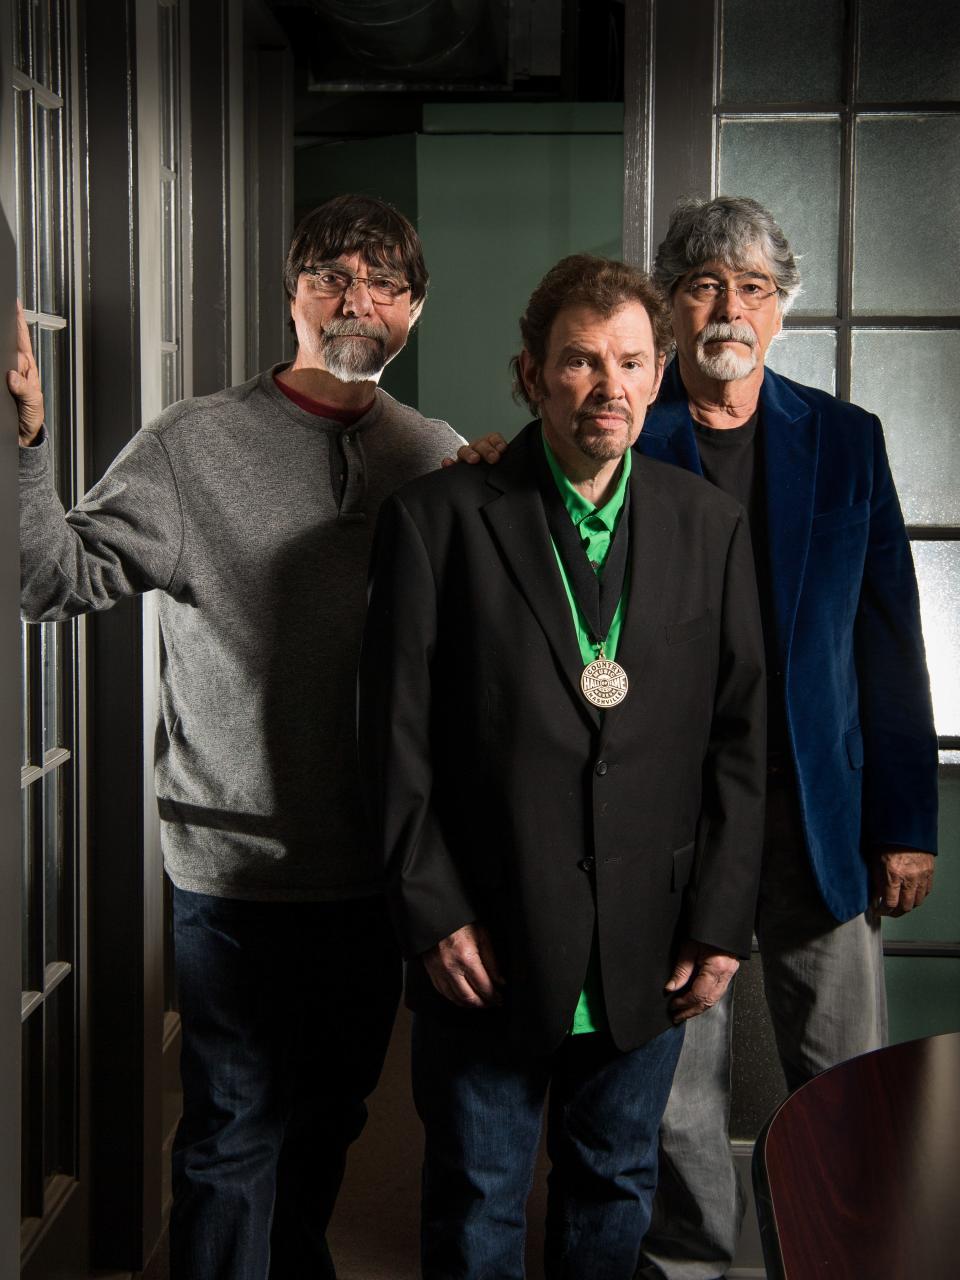 Teddy Gentry (from left), Jeff Cook and Randy Owen of Alabama, photographed in Nashville in 2017.